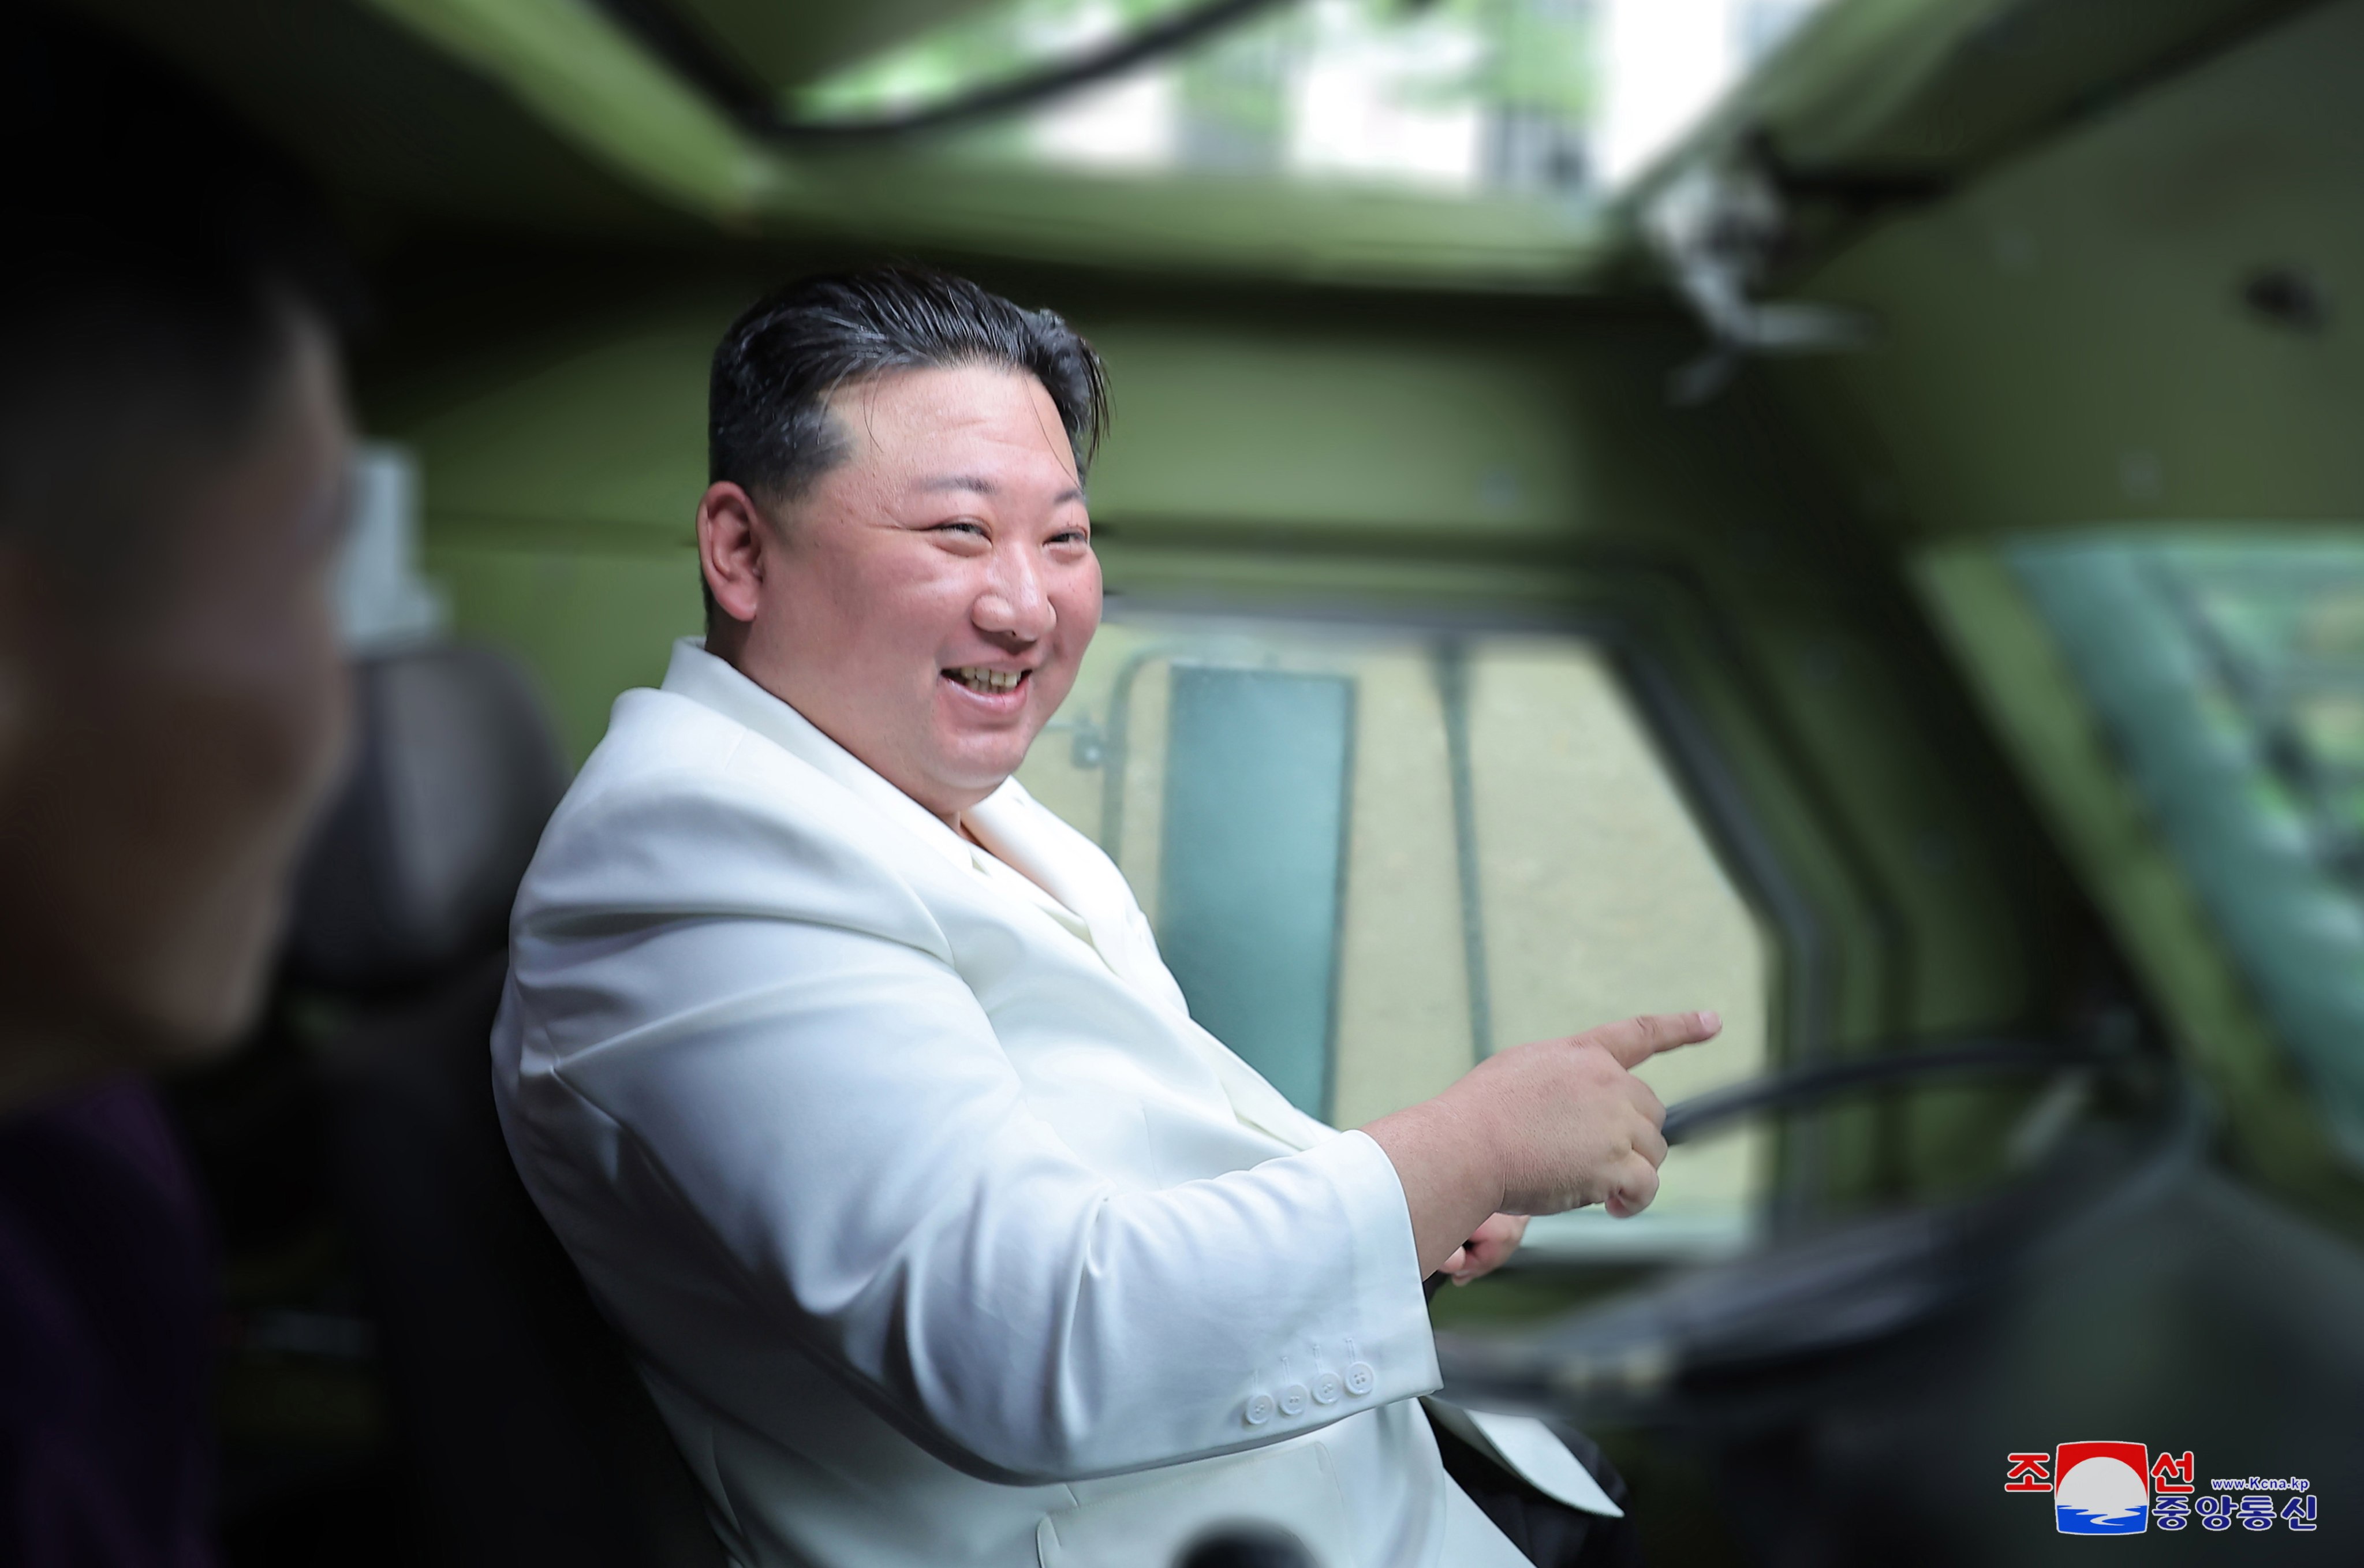 An undated photo released by state media on Monday shows North Korean leader Kim Jong-un inside an armoured vehicle as he inspects a munitions factory at an undisclosed location. Photo: KCNA via EPA-EFE